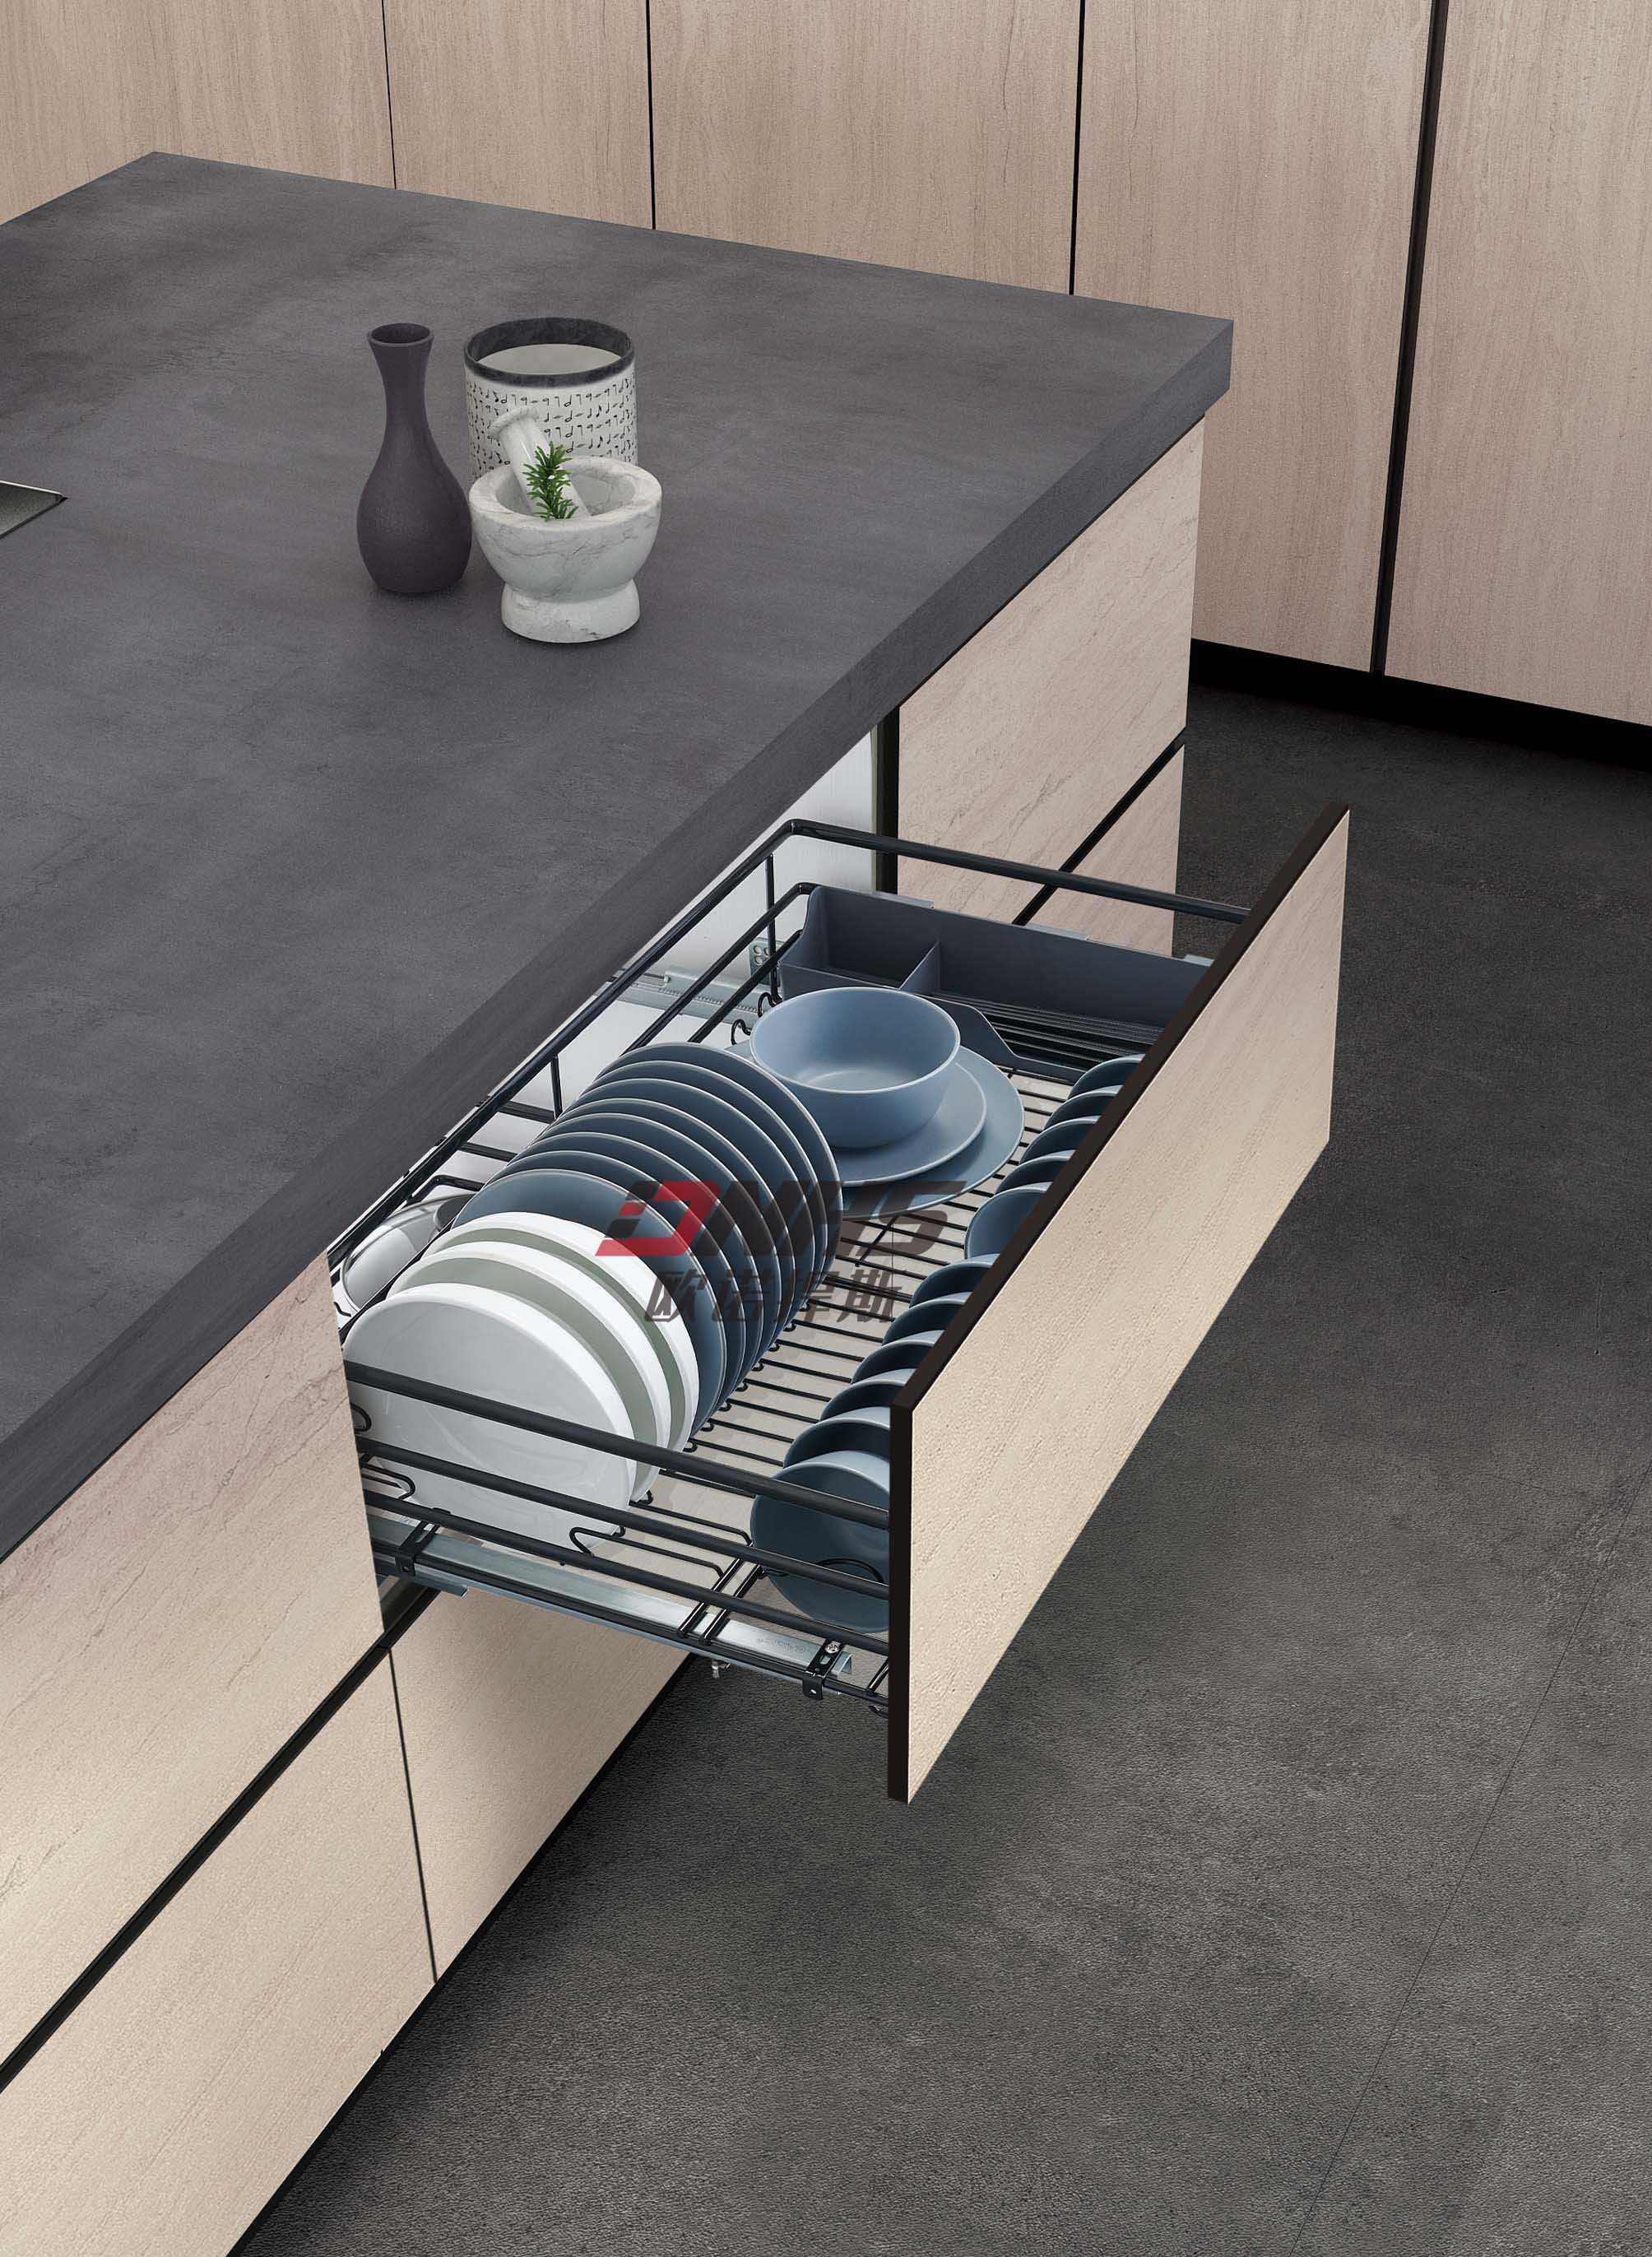 Deep Kitchen Cabinets - Stay Organized with a Pull Out Basket.